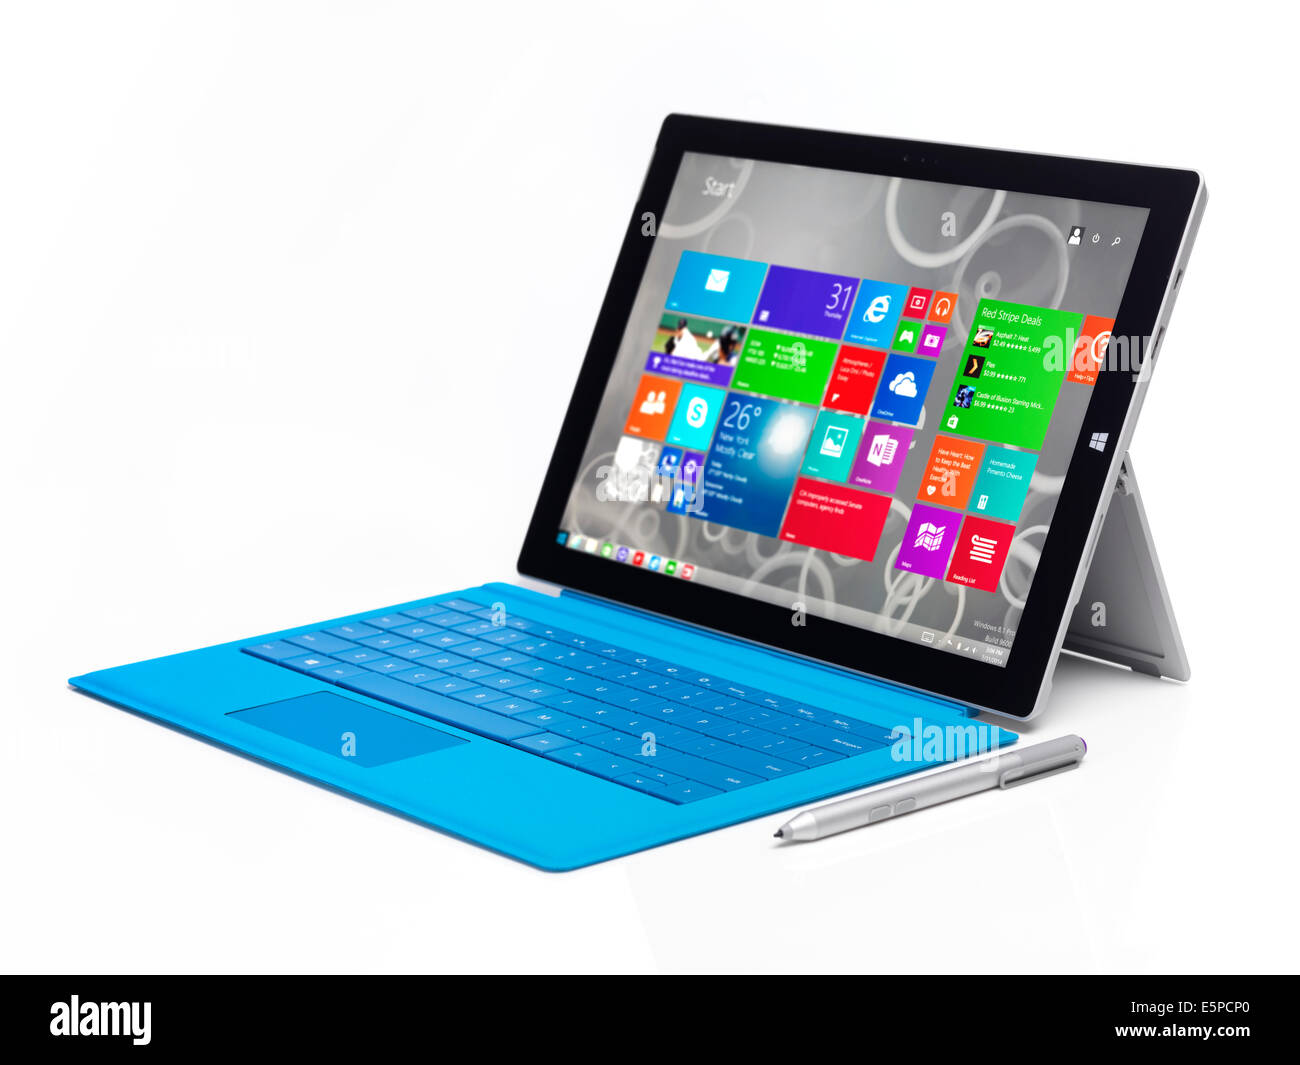 Microsoft Surface Pro 3 tablet computer with Windows 8 start screen on its display isolated on white background Stock Photo